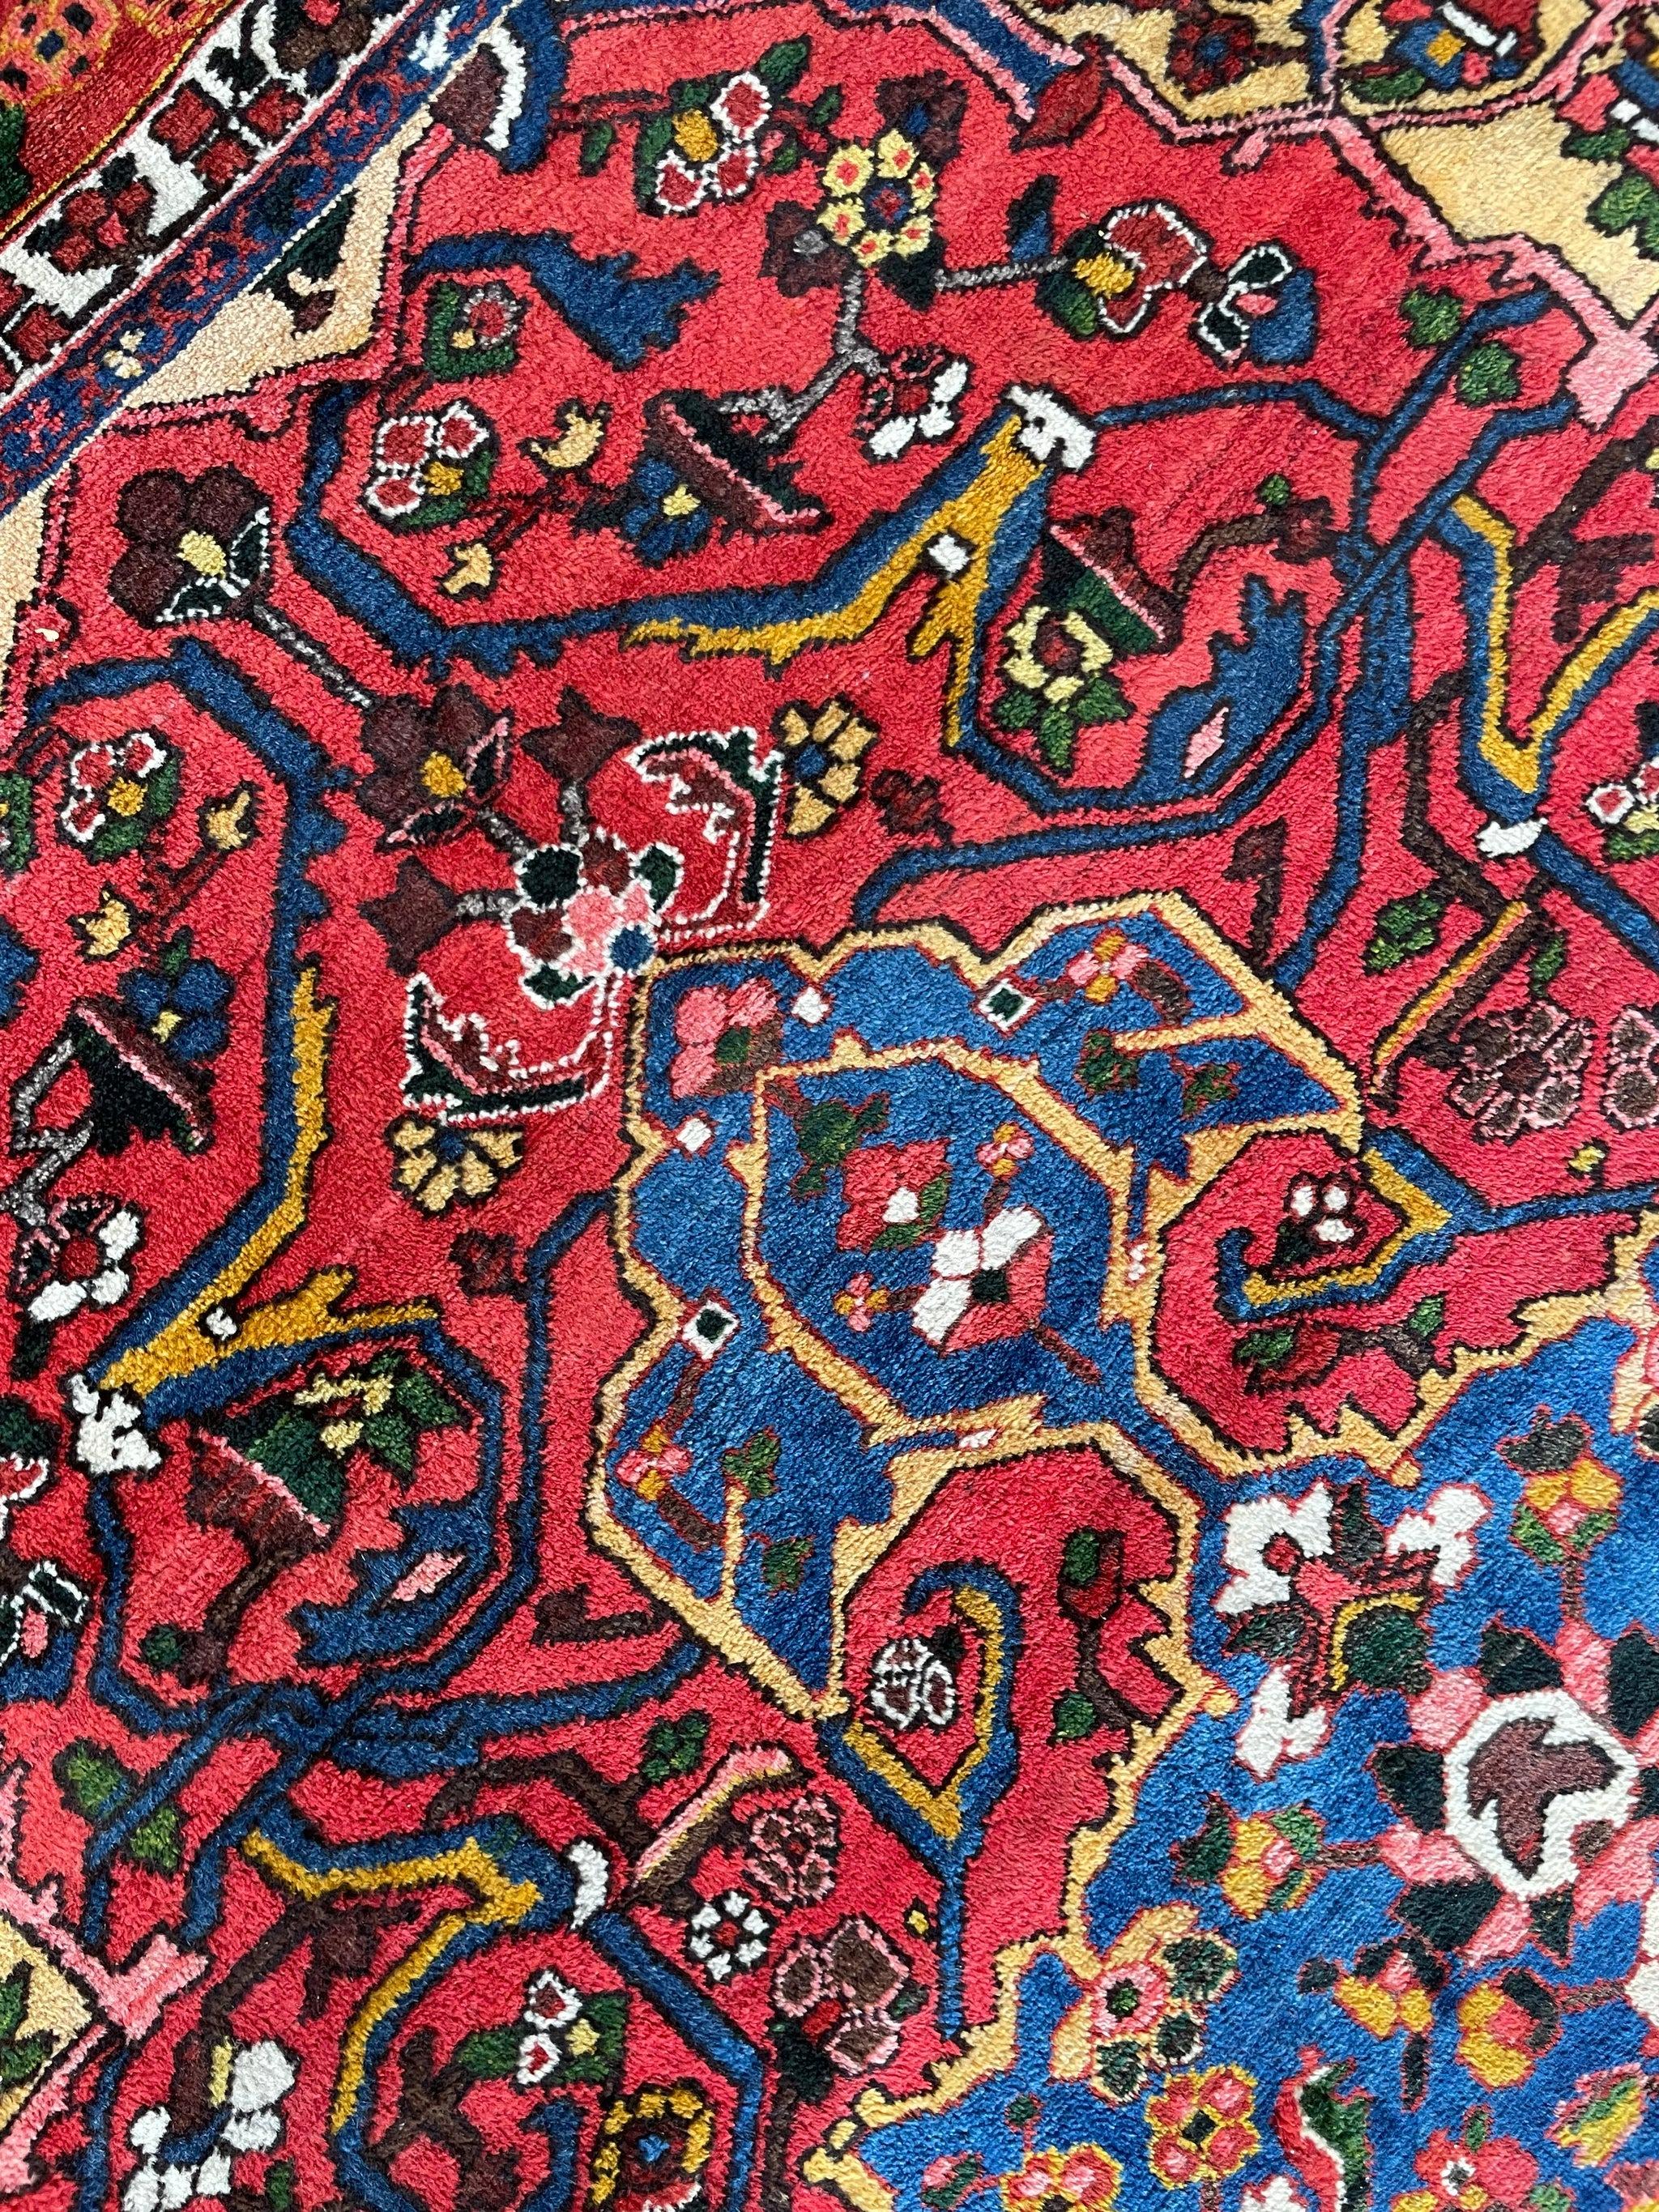 Lively Colorful Palace Size Vintage Beauty with Tribal & Old-World Charm  Strawberry, Watermelon, Saffron-Wheat, Blues, Greens, Grey, Taupe

About: huge palatical beauty - palace size or mansion size piece that is a perfect size to anchor a room and